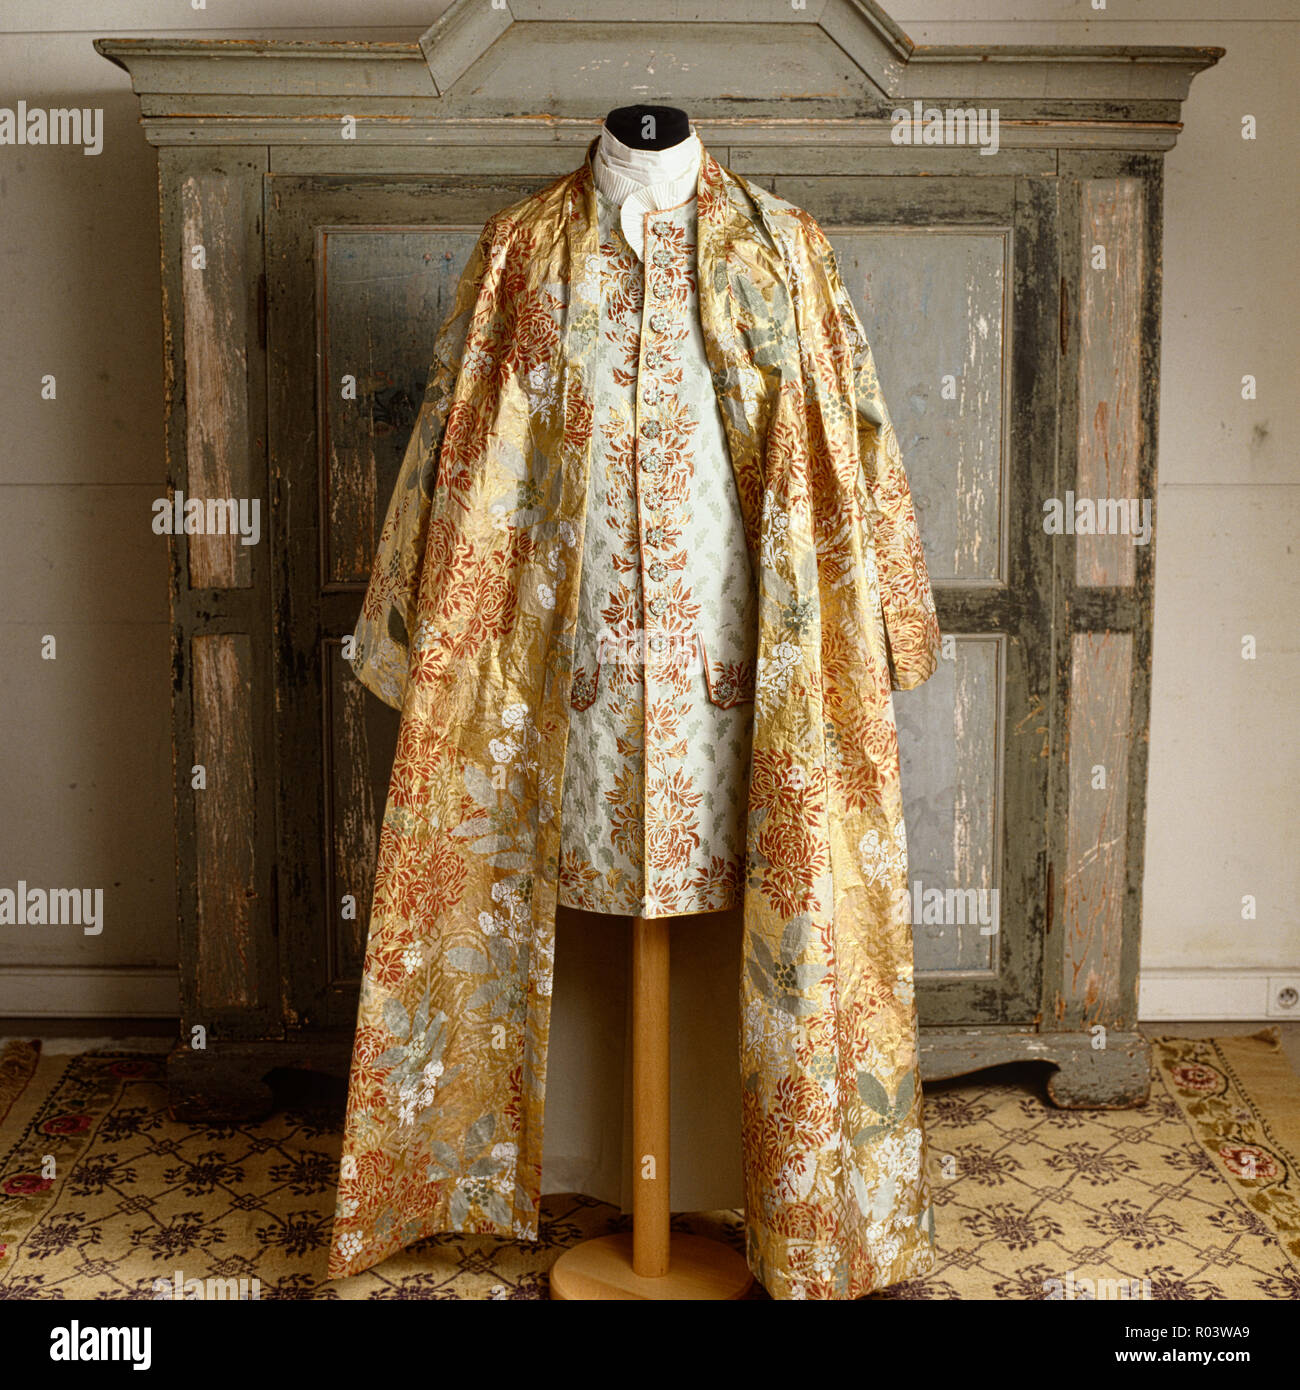 Paper coat and jacket by Isabelle de Borchgrave Stock Photo